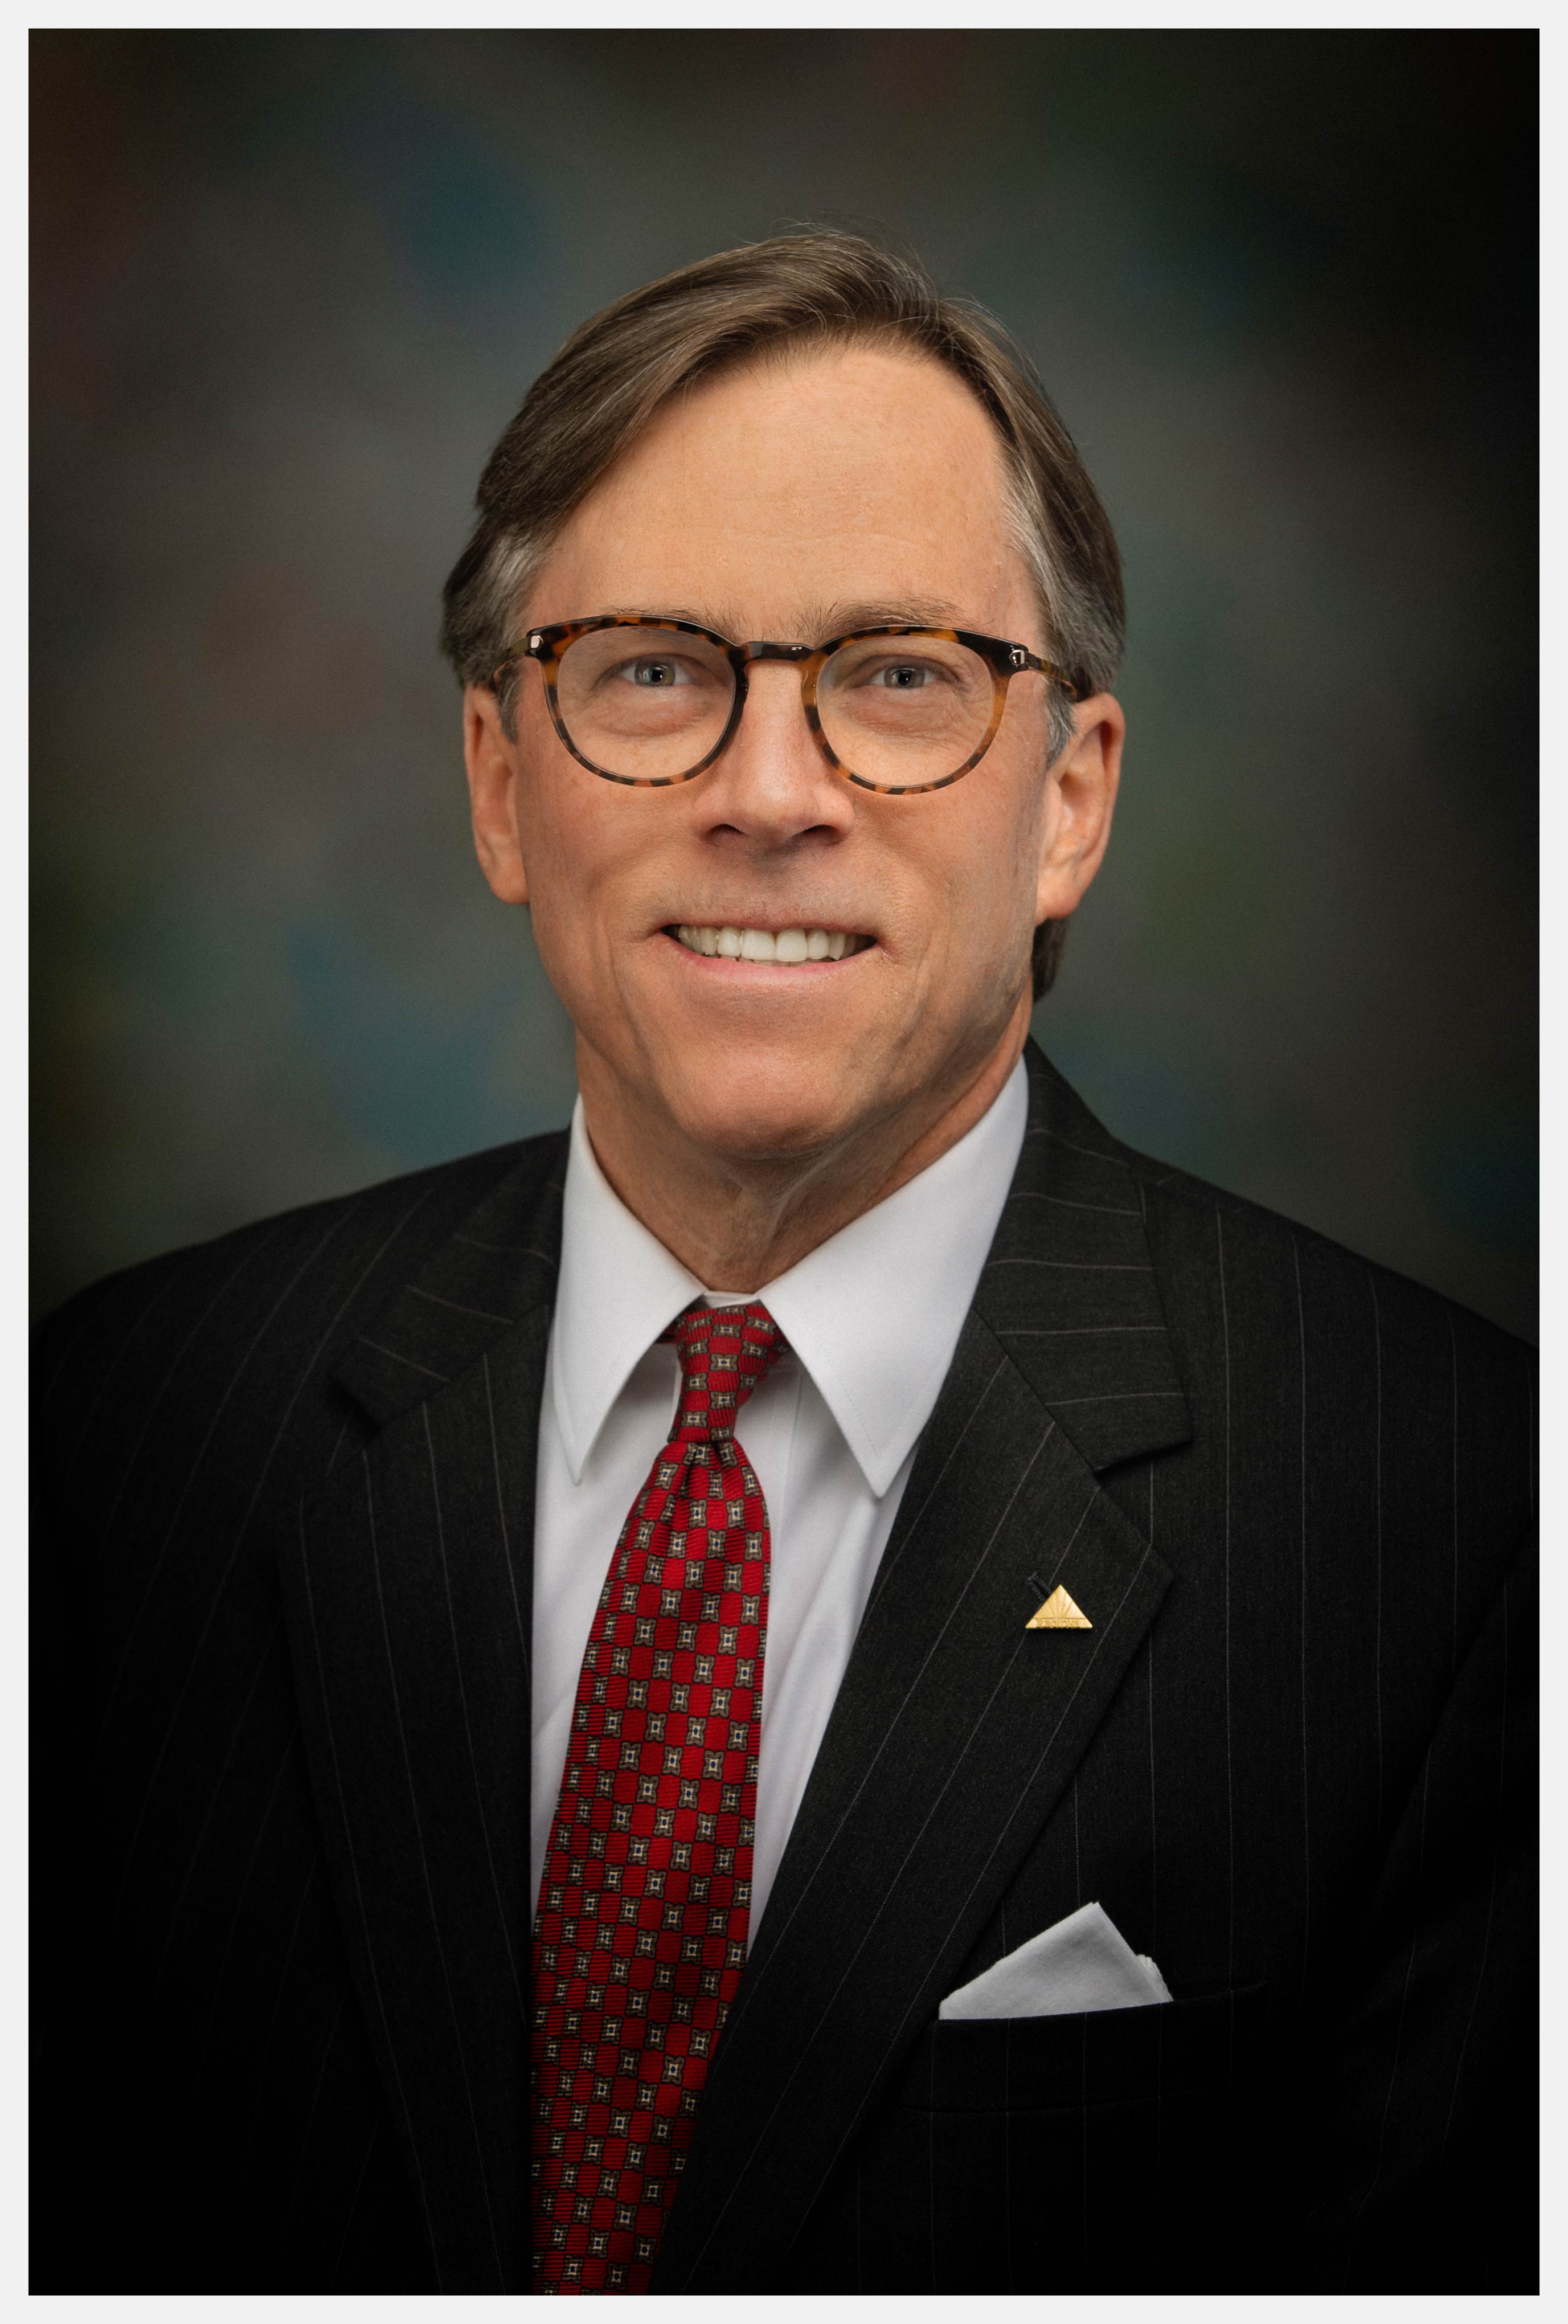 Dallas Professional Business Headshot of Executive in Suit and Tie